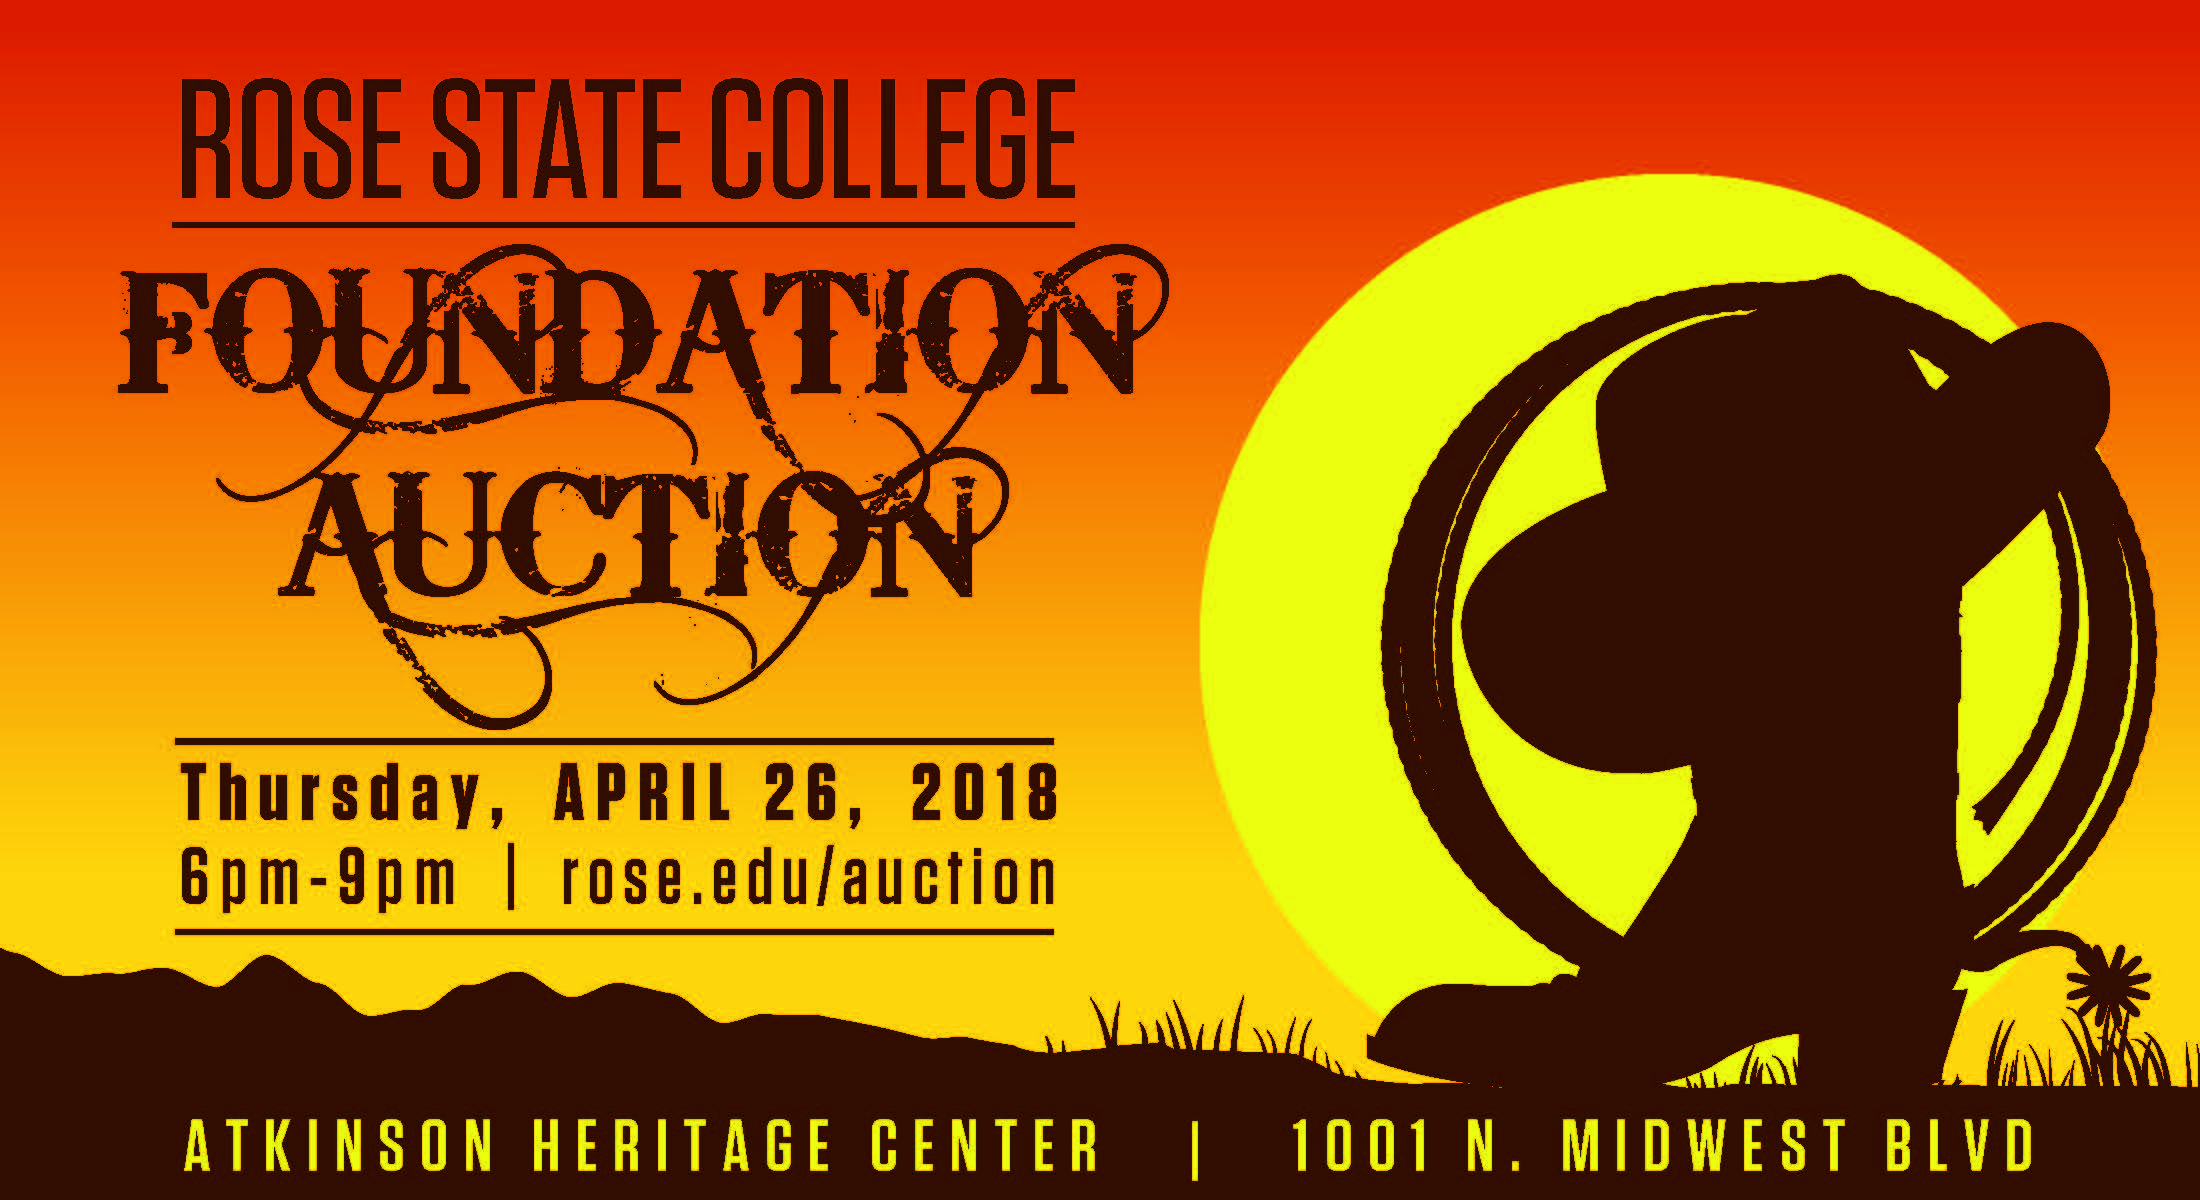 Rose State College Foundation Auction